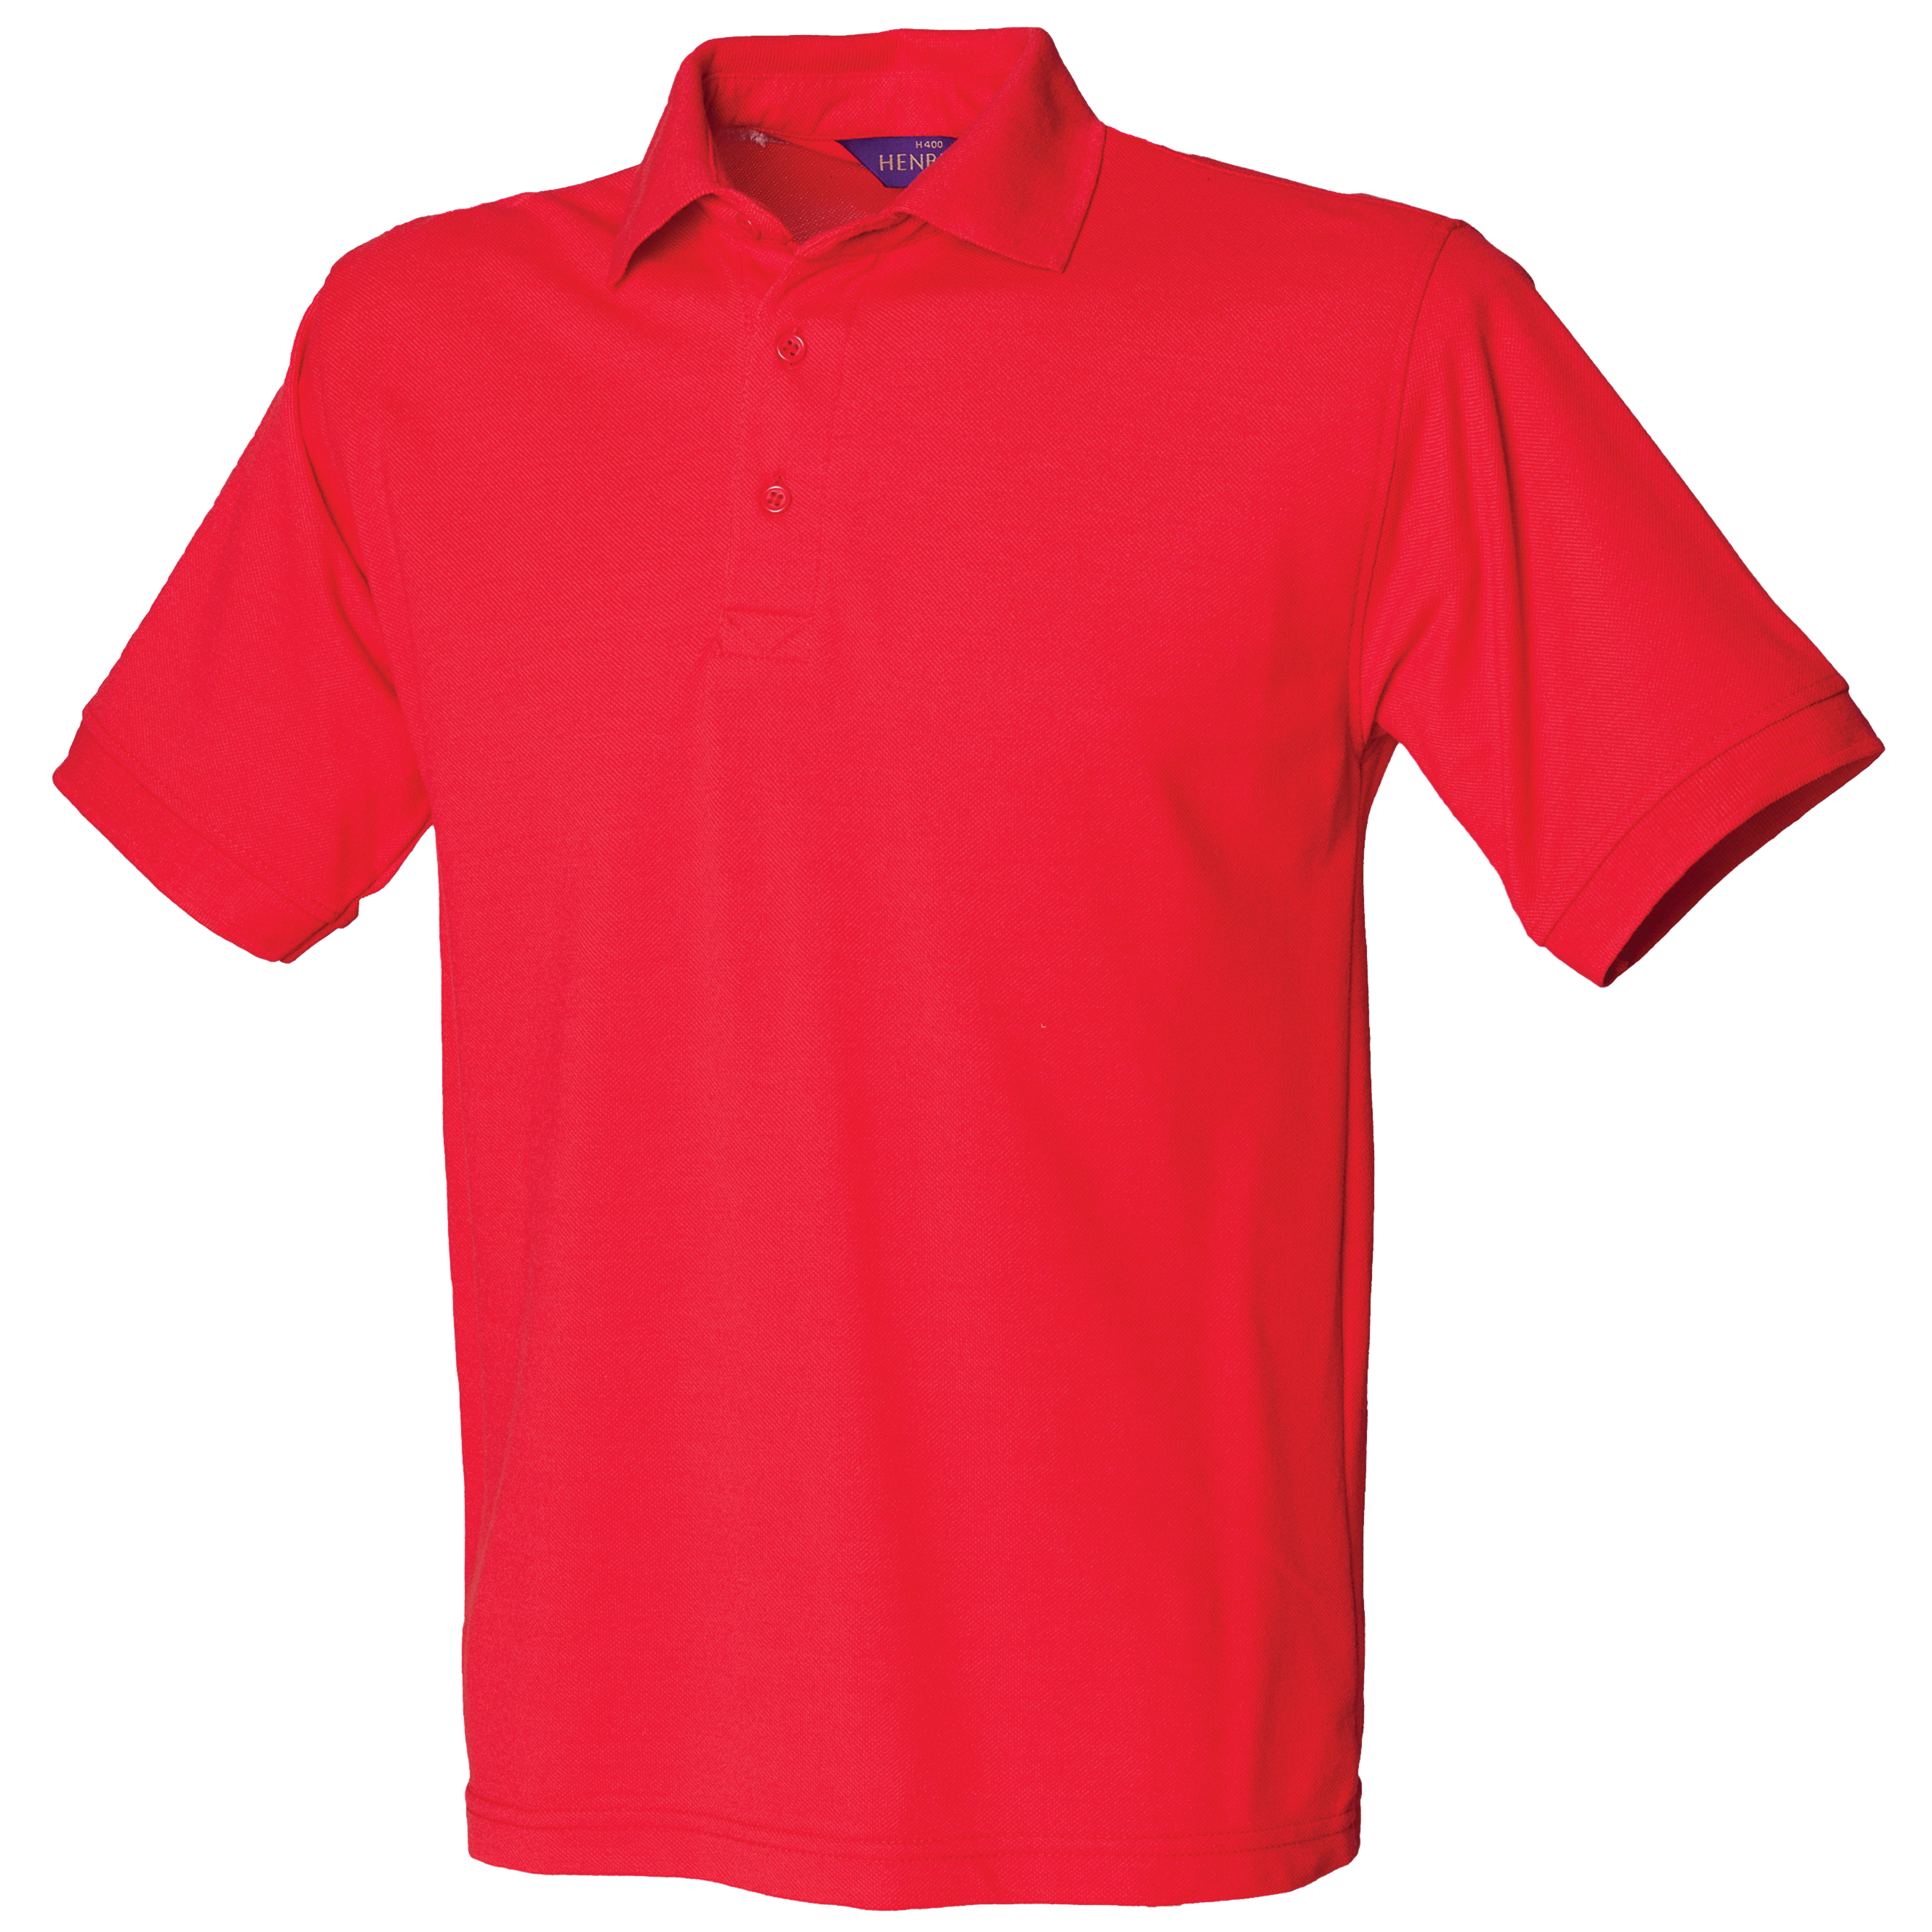 ax-httpswebsystems.s3.amazonaws.comtmp_for_downloadhenbury-65-35-classic-pique-polo-shirt-red.jpg